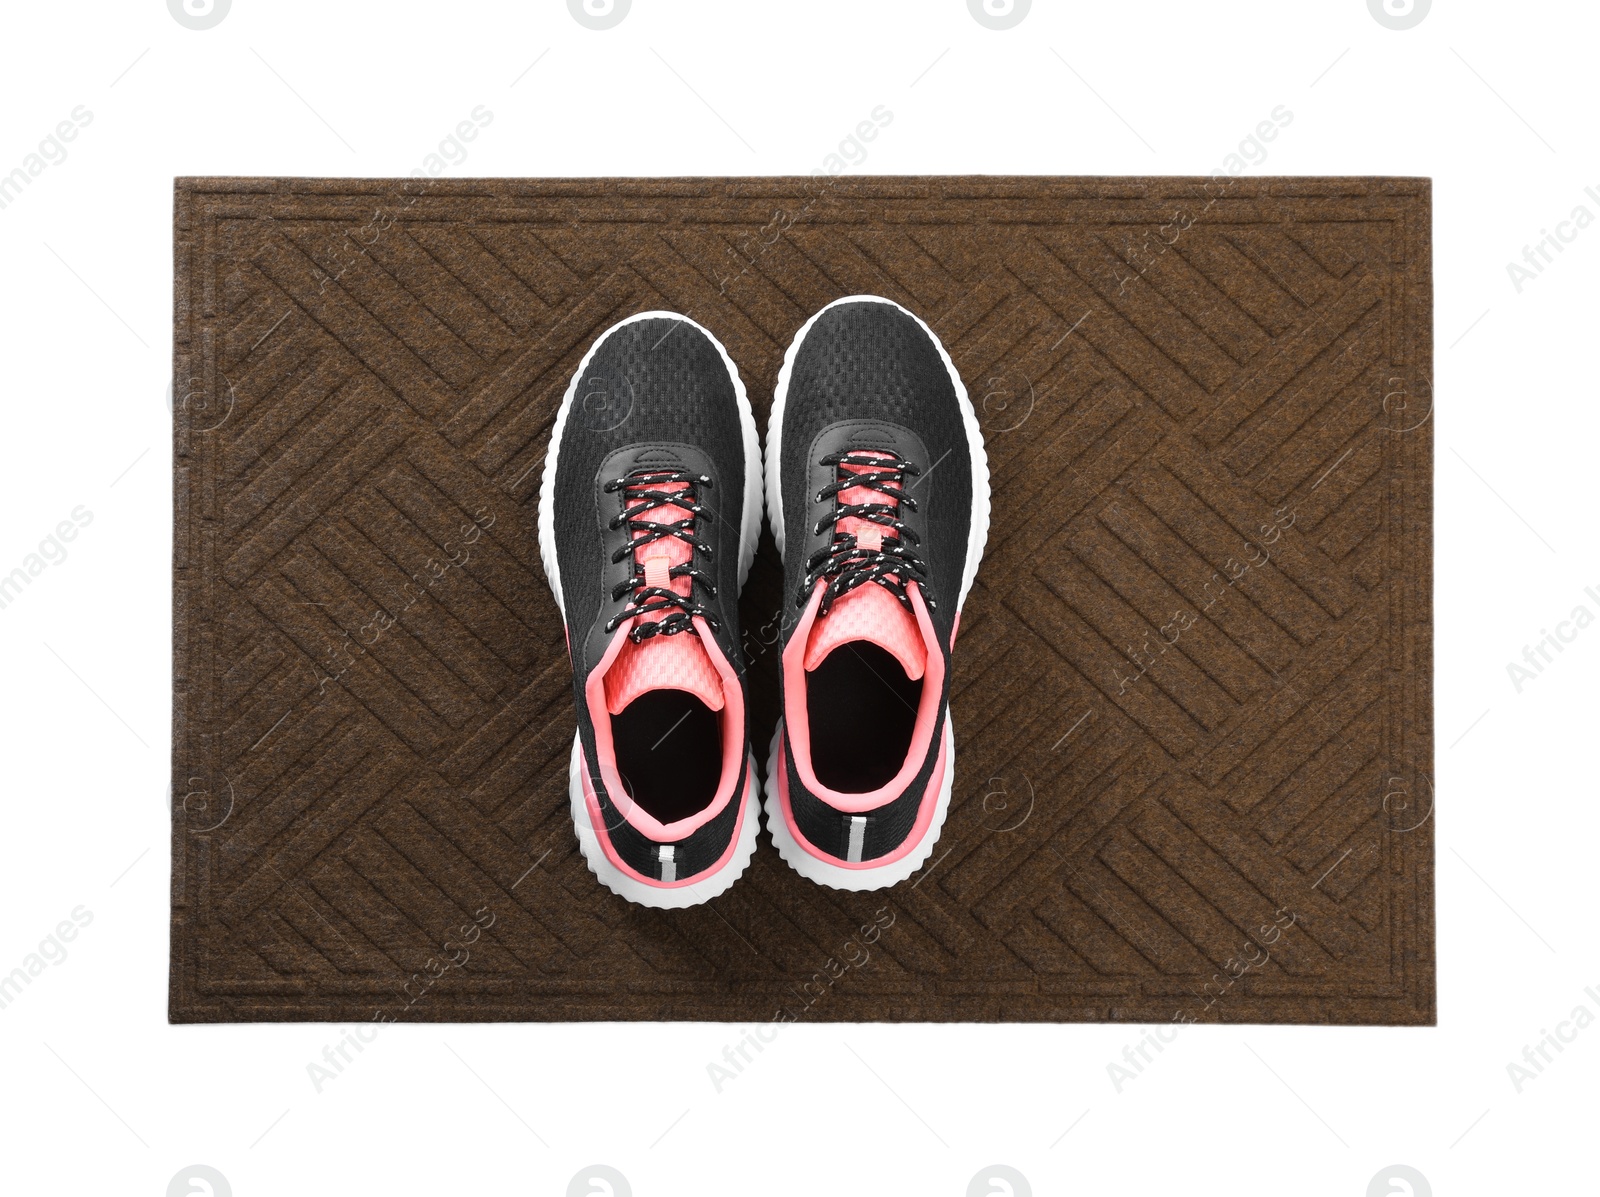 Photo of New clean door mat with shoes on white background, top view